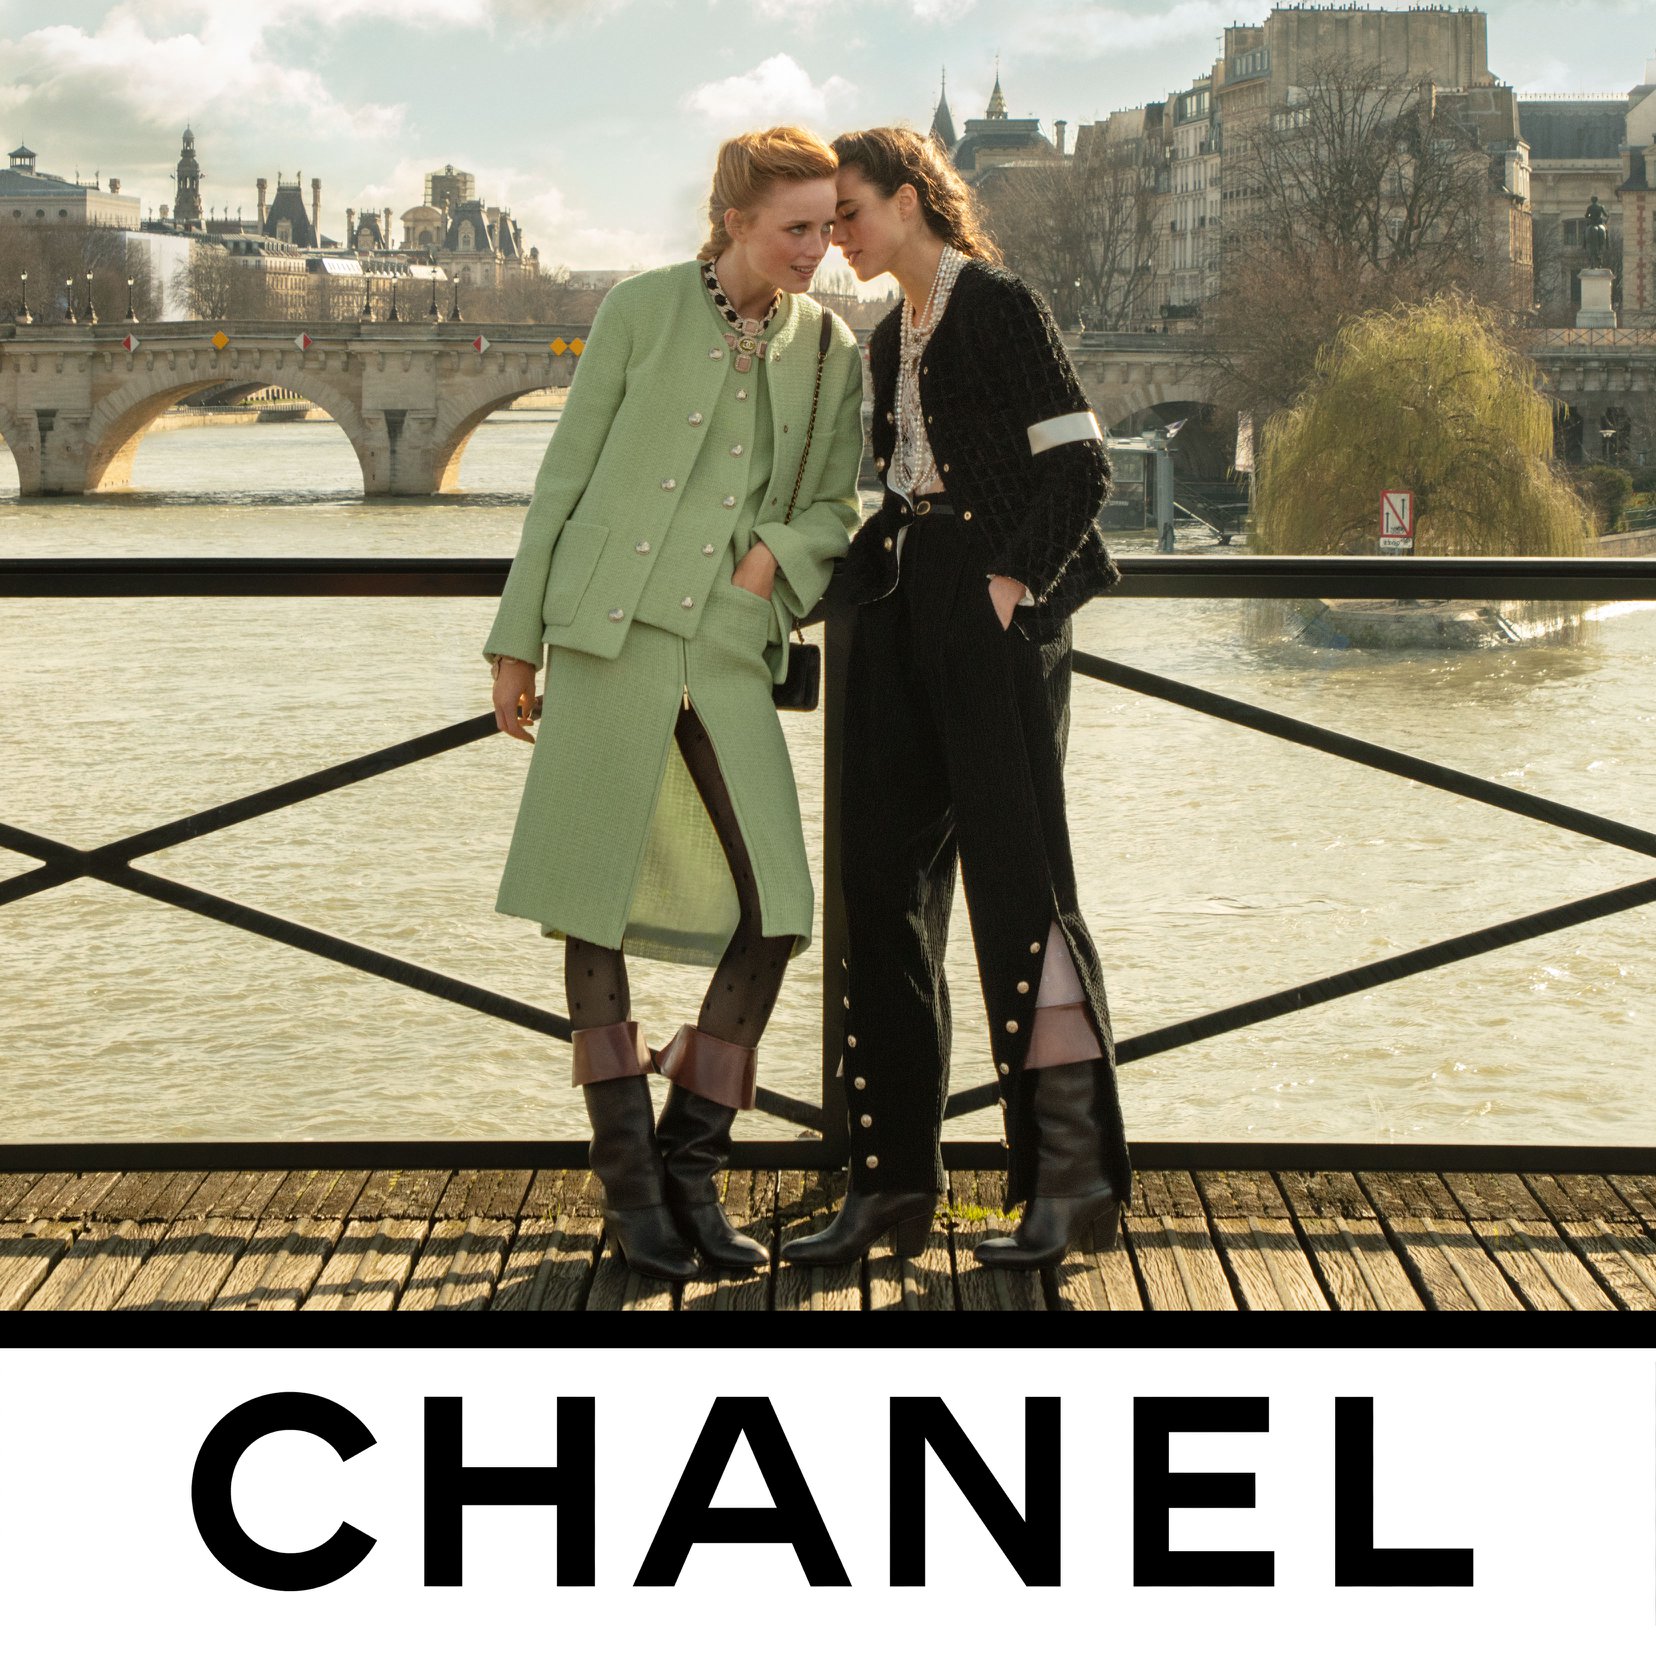 Rianne Van Rompaey & Margaret Qualley on the Pont des Arts in Paris wearing the Fall-Winter 2020/21 Ready-to-Wear collection.